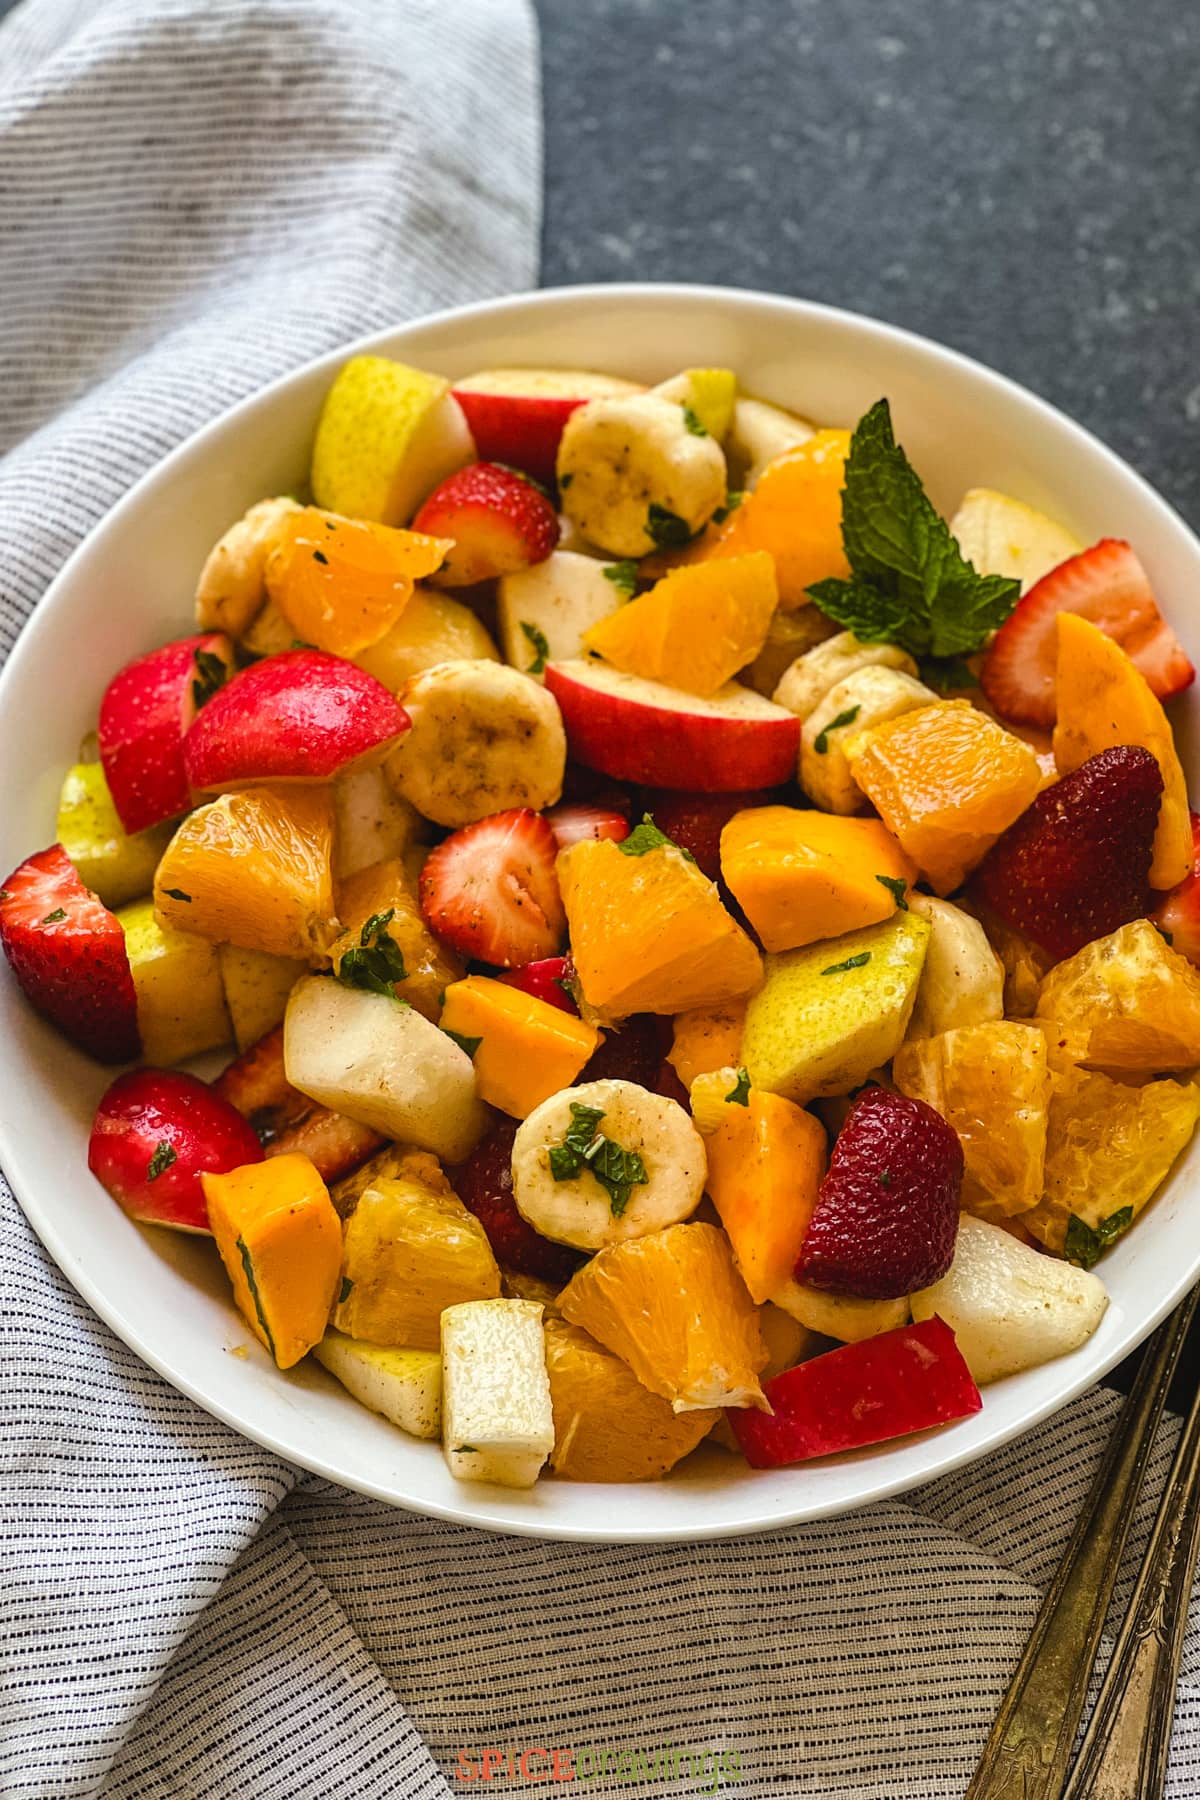 Fruit salad seasoned with spices and mint in white bowl